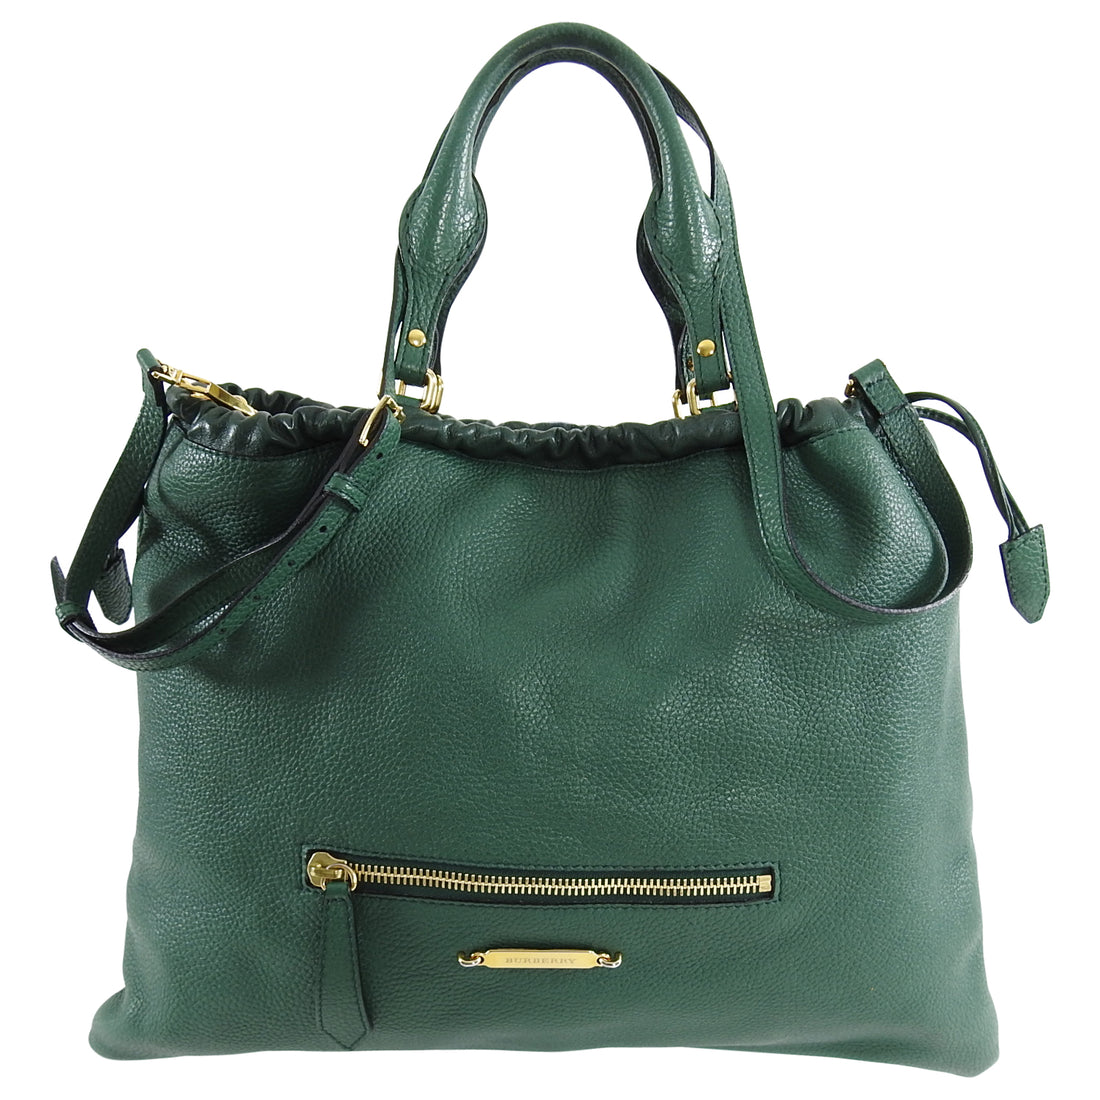 Burberry Green Large Leather Tote Bag with Shoulder Strap